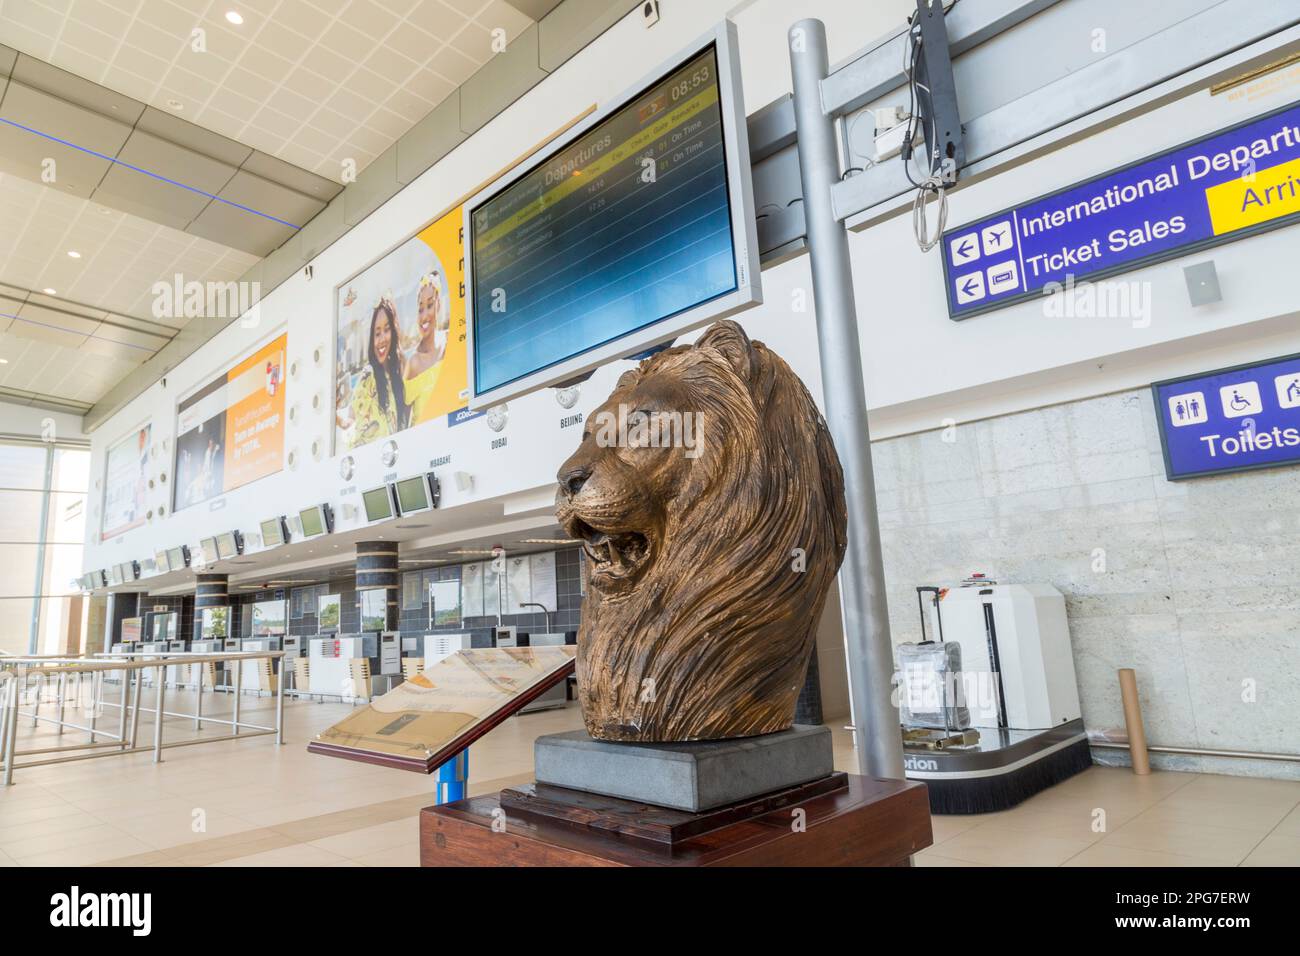 Sculpture of a male lion in the interior of the King Mswati III International airport terminal building Stock Photo